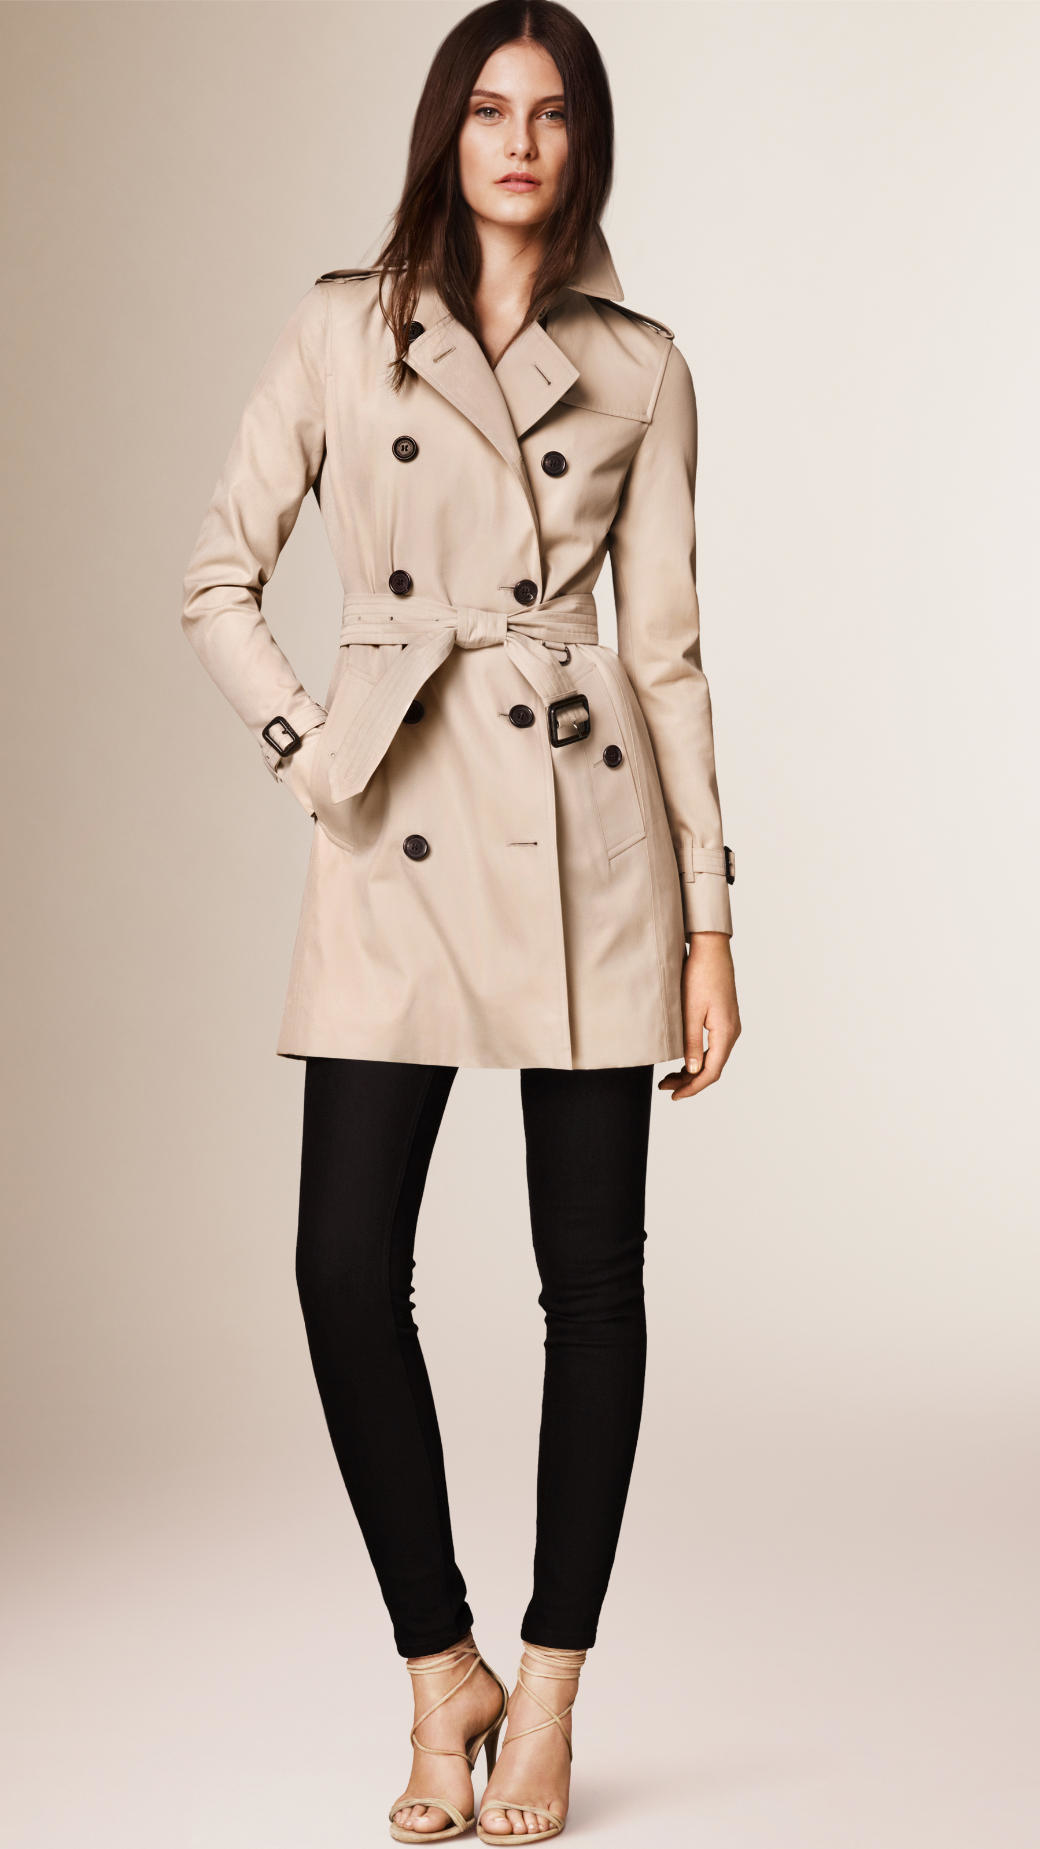 Burberry The Kensington - Mid-length Heritage Trench Coat in Natural - Lyst